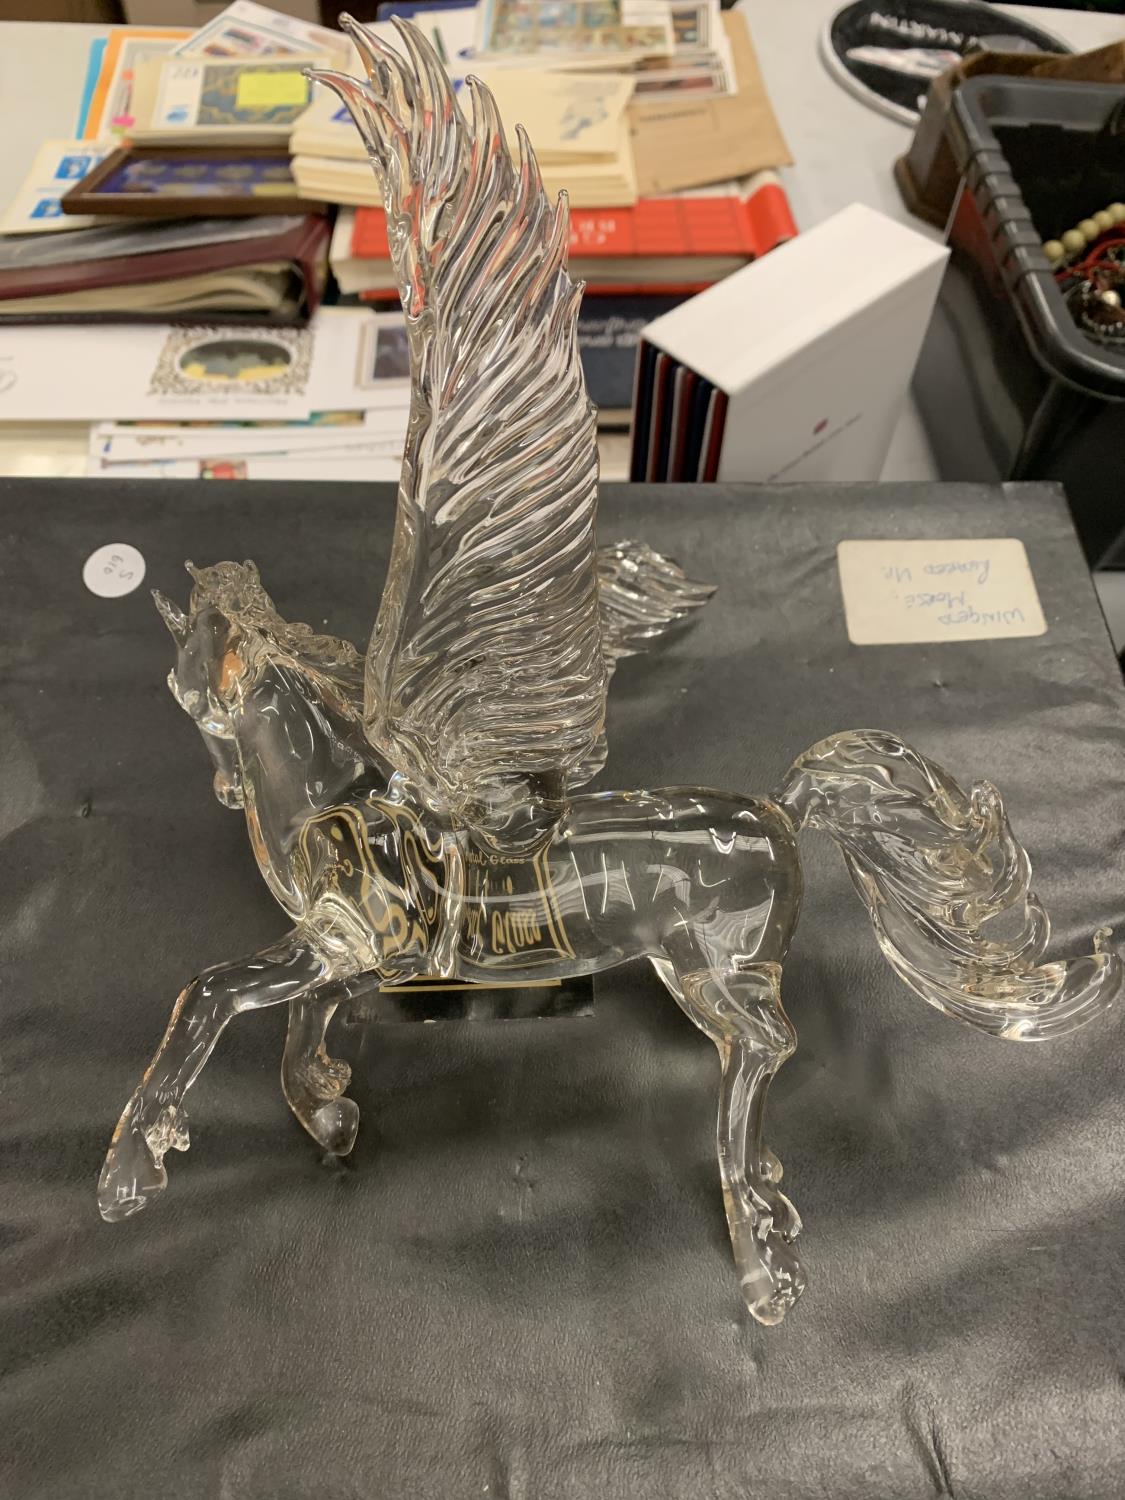 A CRYSTAL GLASS SCULPTURE OF A WINGED HORSE - Image 2 of 3